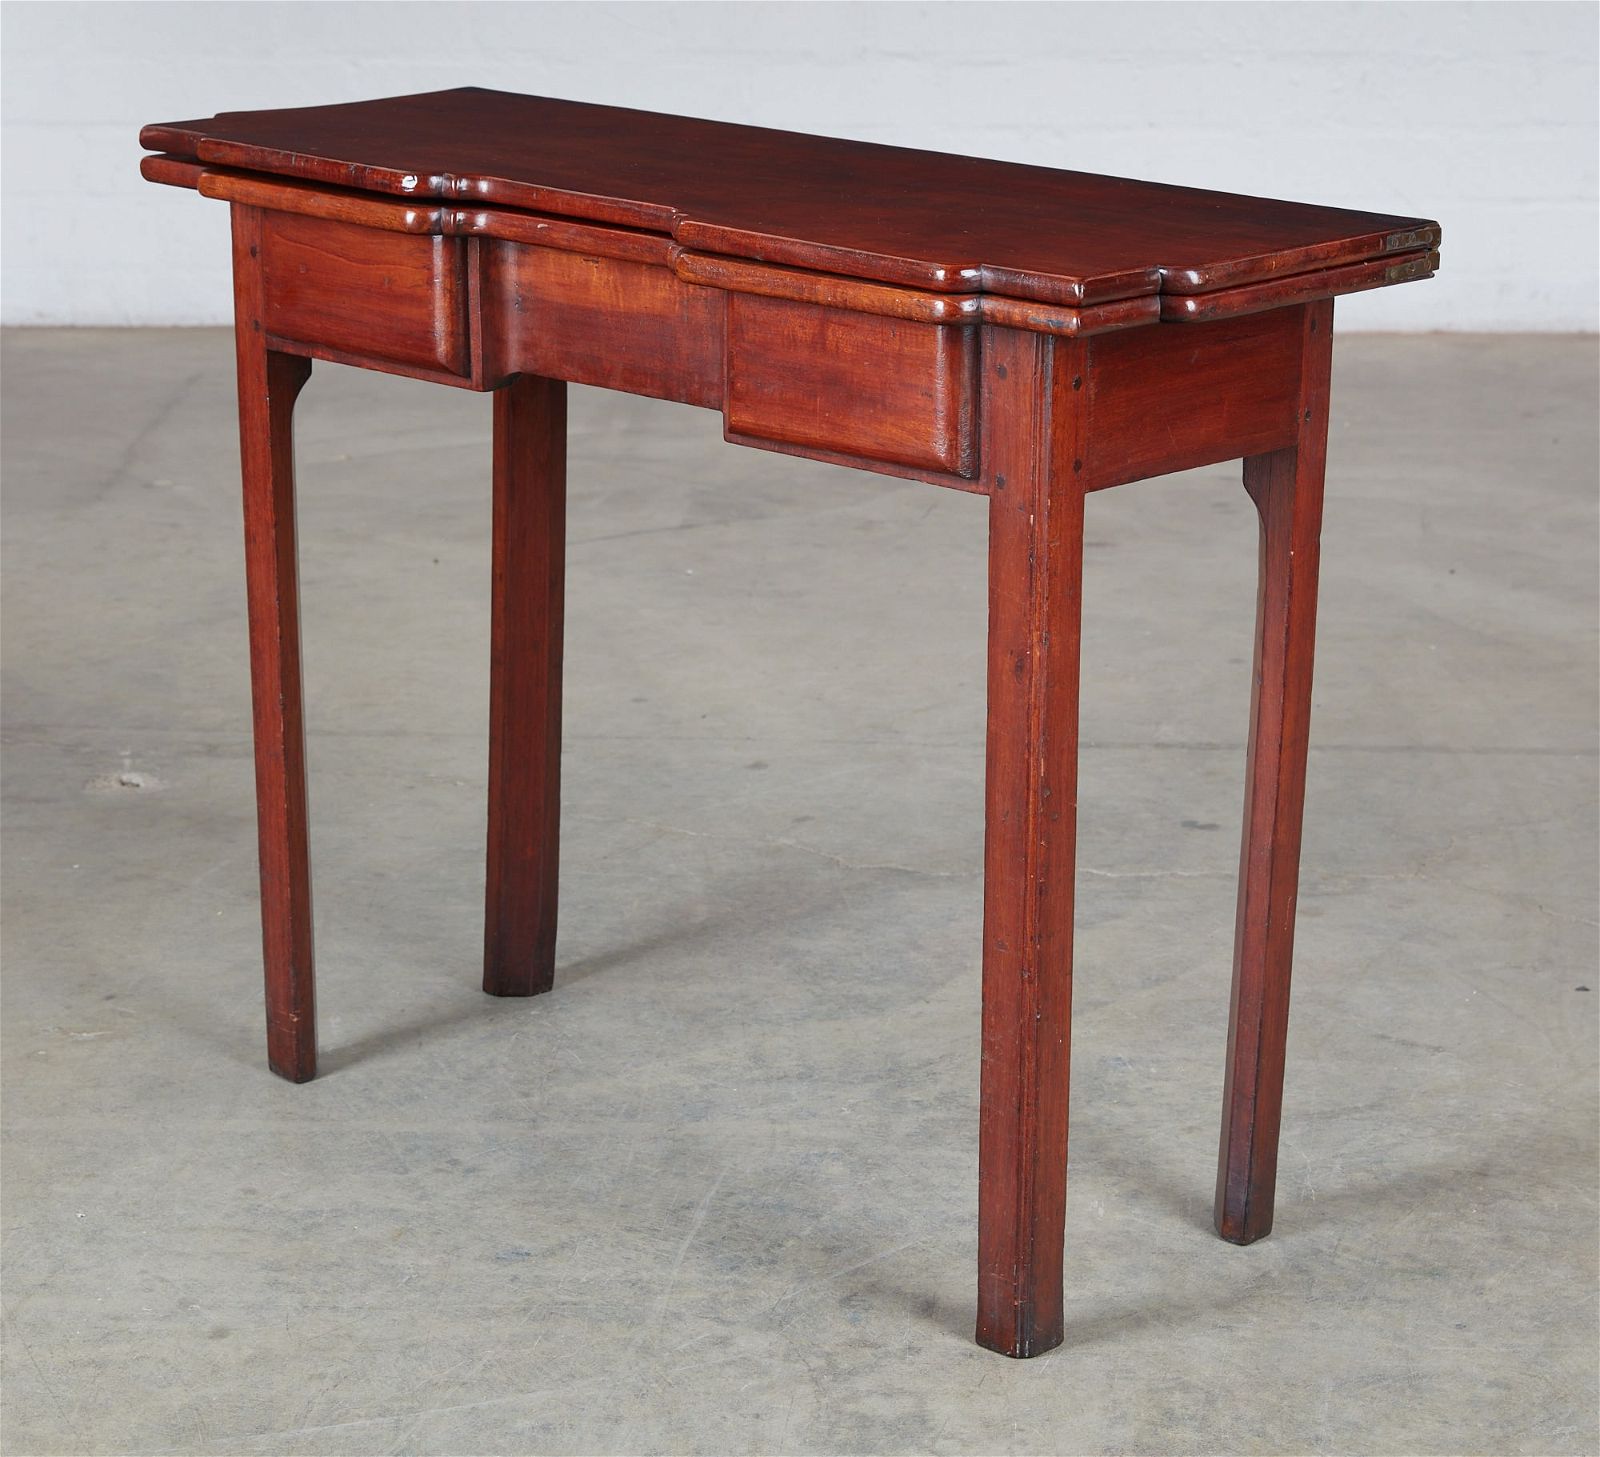 A CHIPPENDALE CHERRY FOLD TOP GAMES 2fb414d